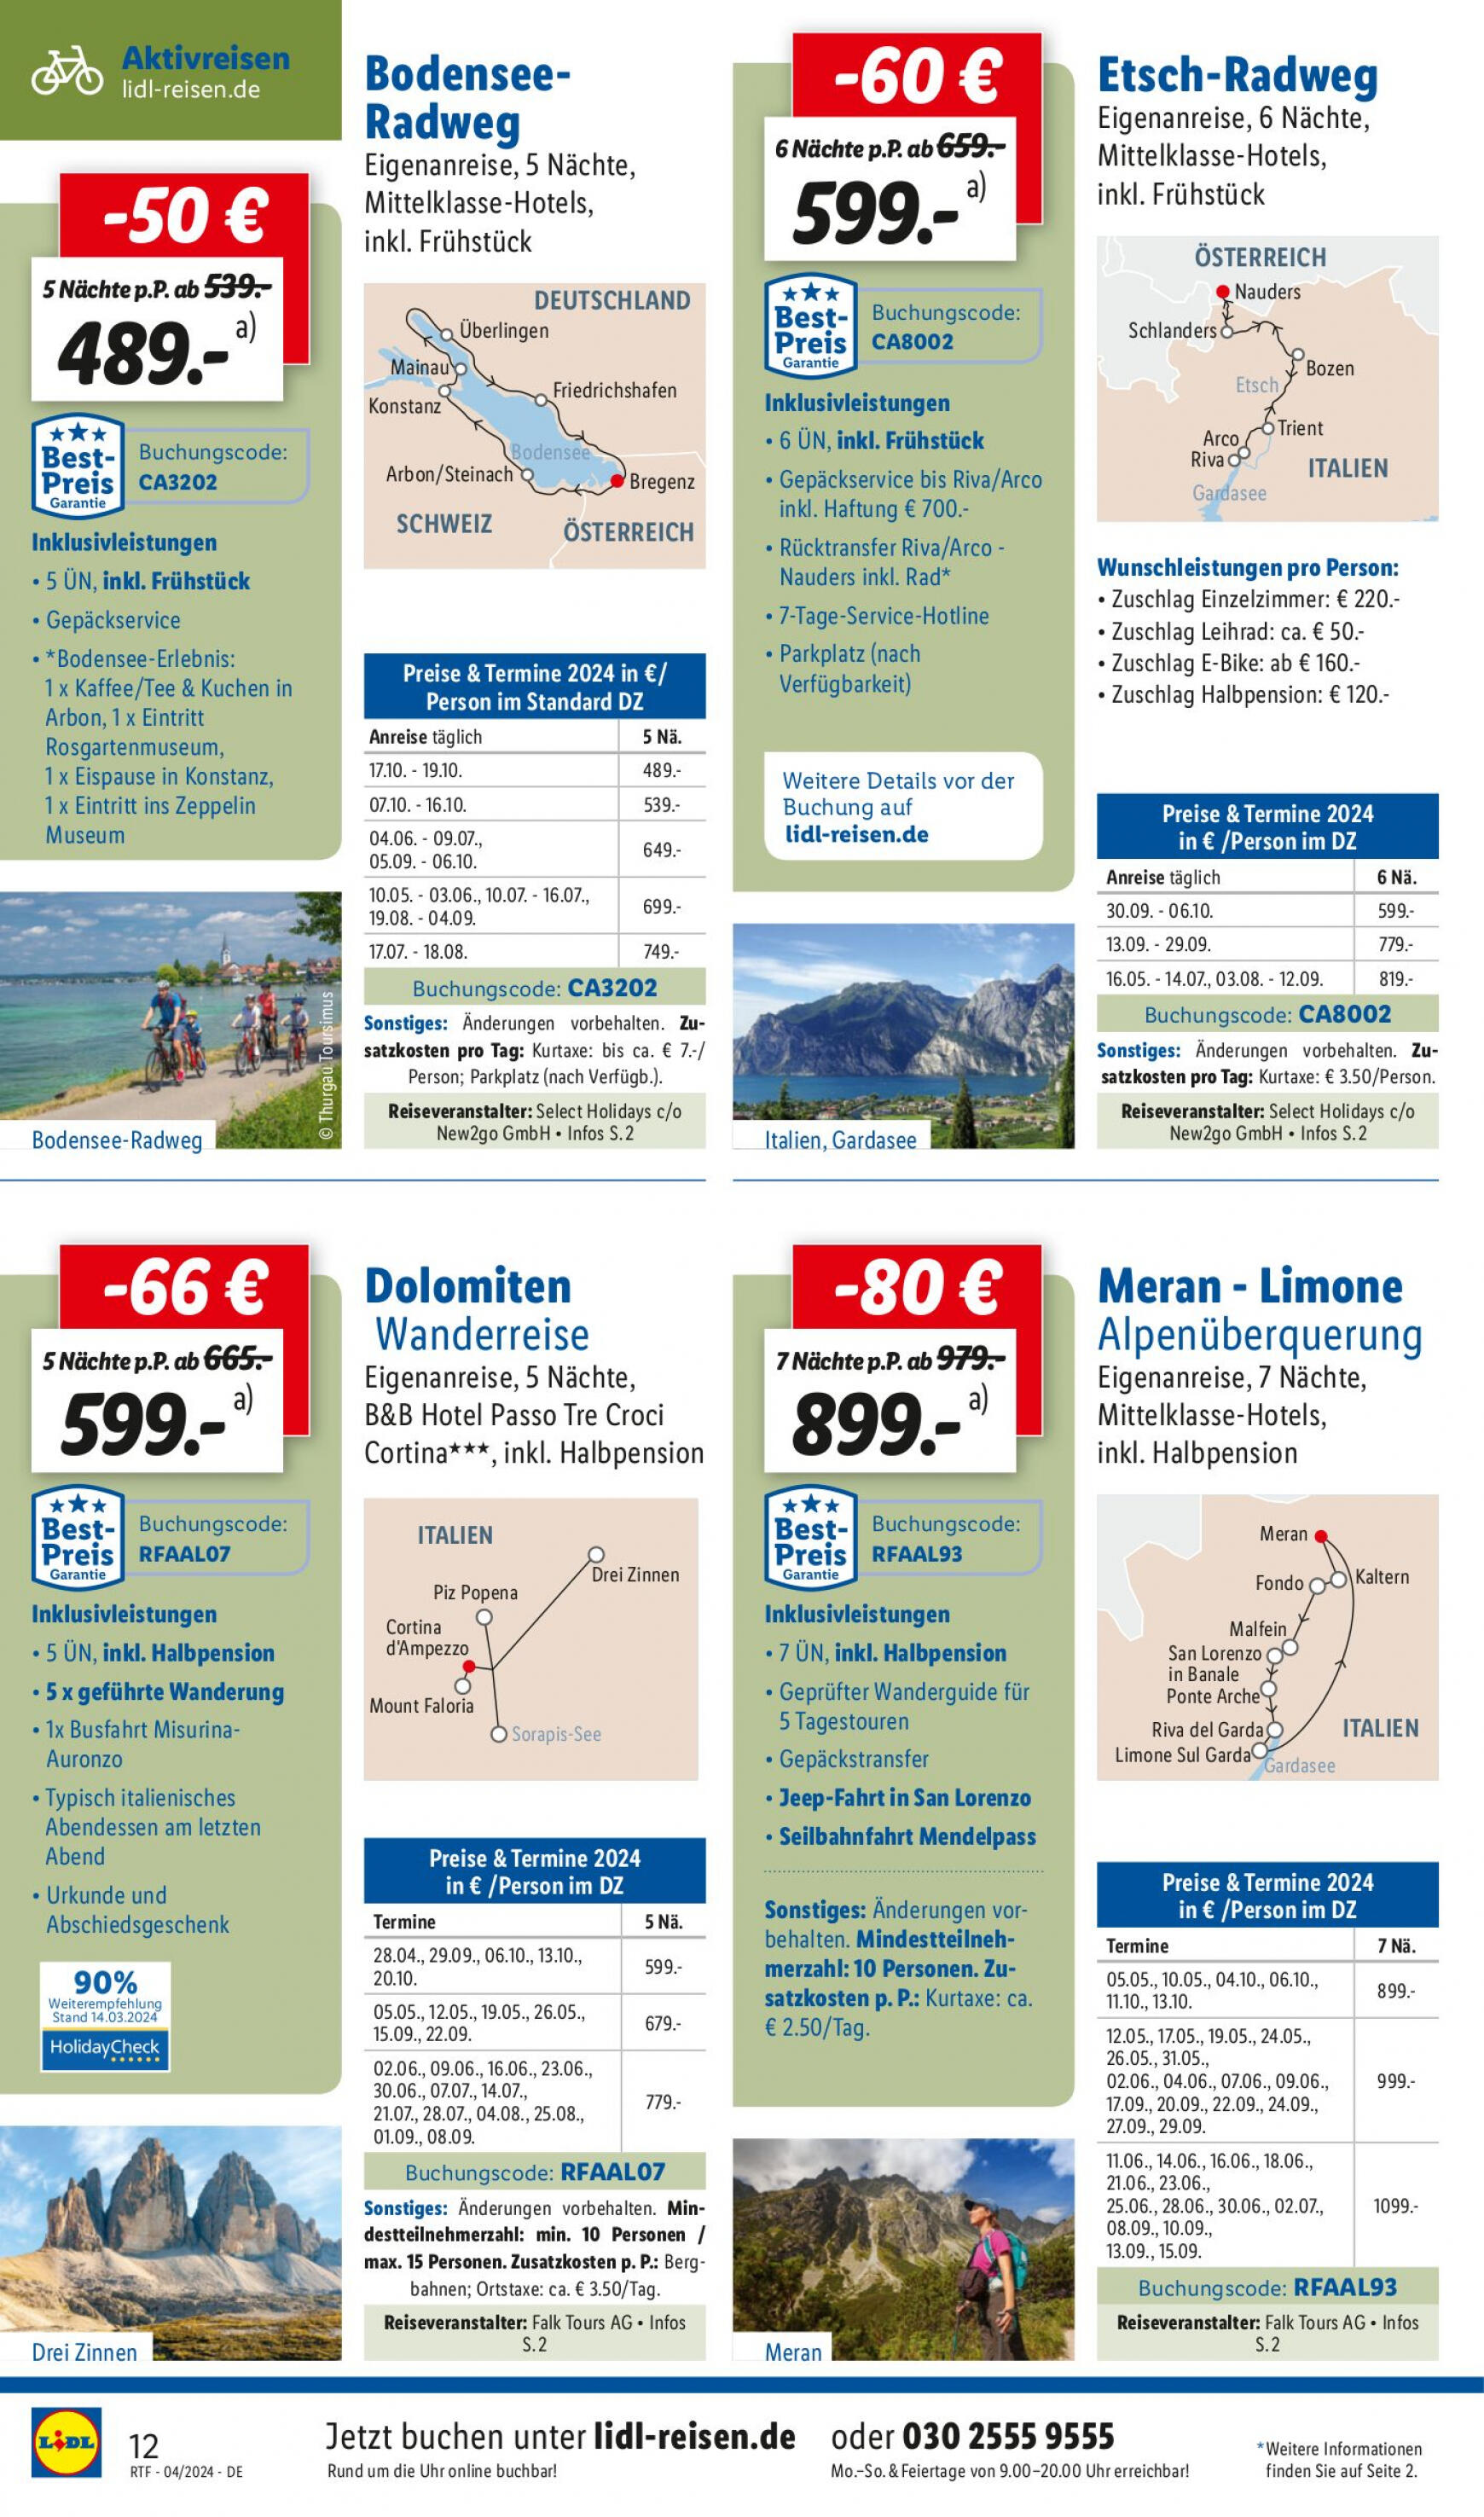 lidl - Flyer Lidl - Sommerschnäppchen aktuell 13.04. - 15.05. - page: 12